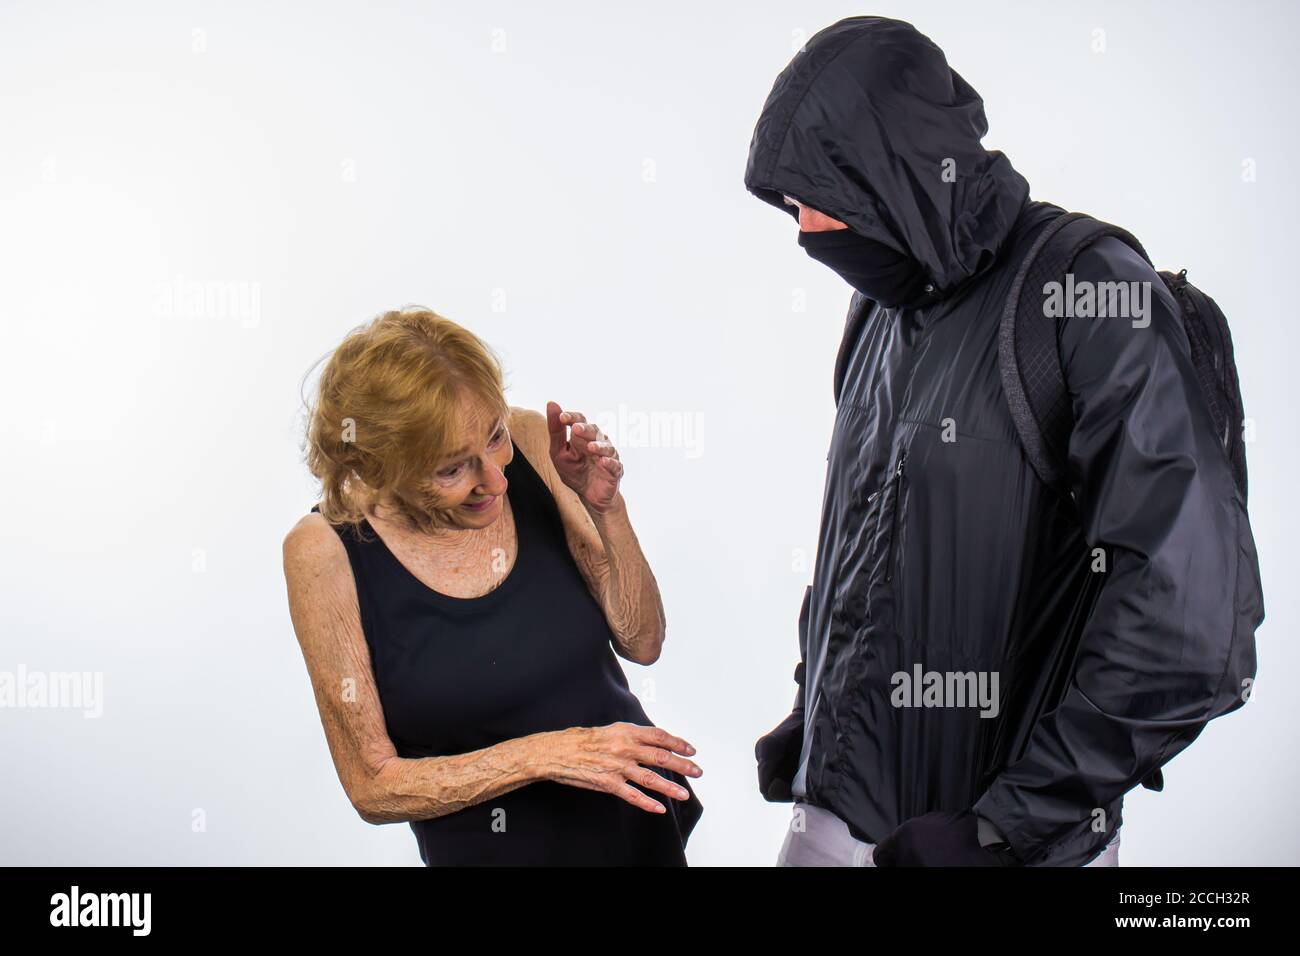 Protester With Face Mask Intimidates Small Senior Woman Stock Photo